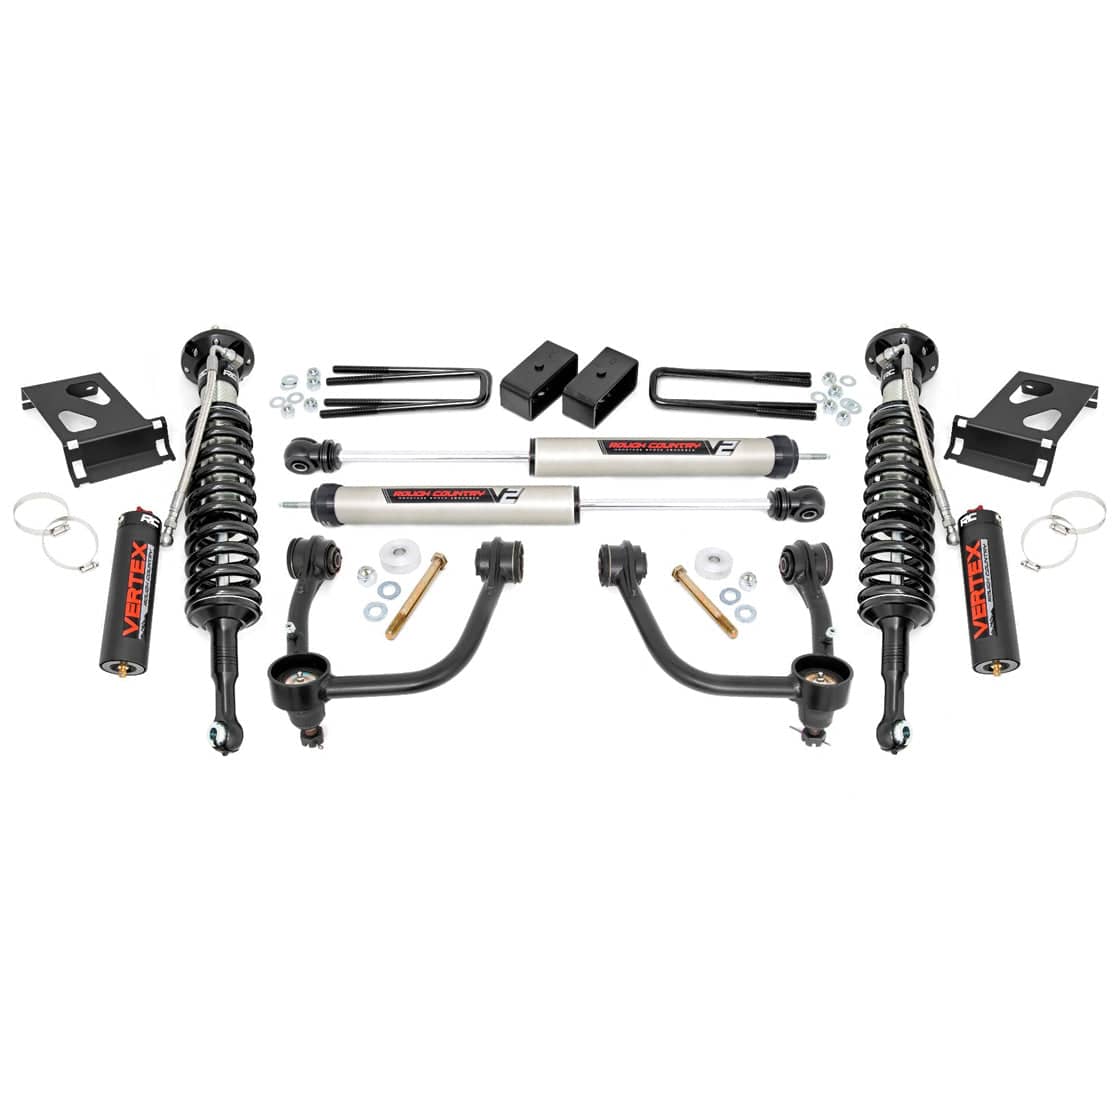 Rough Country 3.5 Bolt-On Lift Kit W/N3 Struts for 2005-2023 Tacoma - 74231